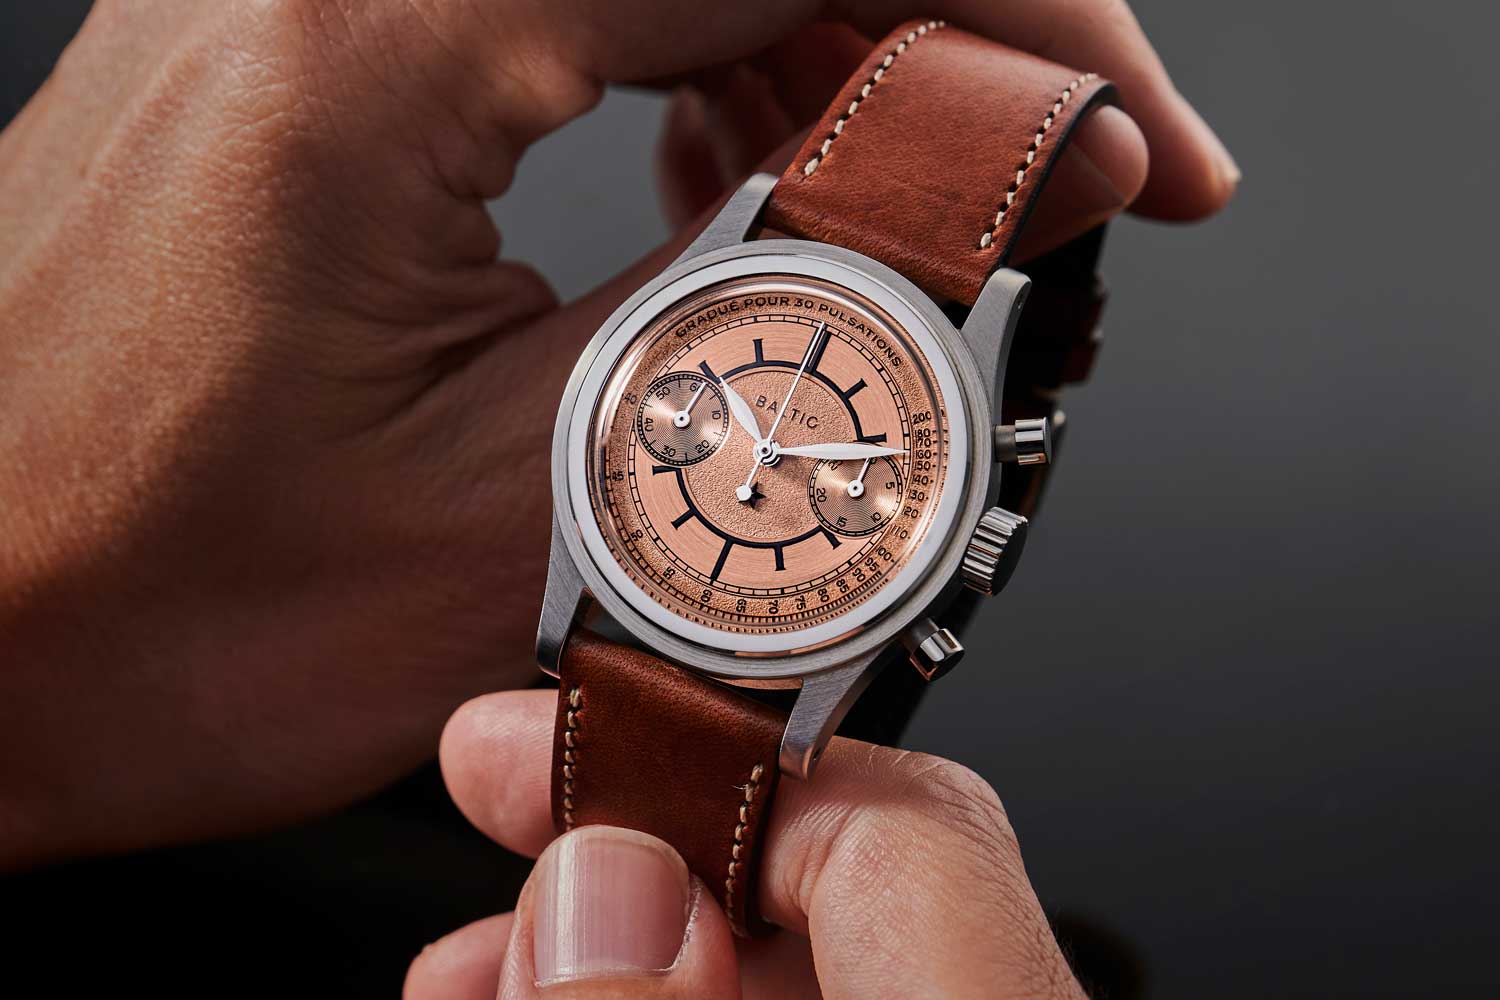 The Baltic Bicompax Pulso for Revolution & The Rake is a limited edition of 250 pieces (© Revolution)